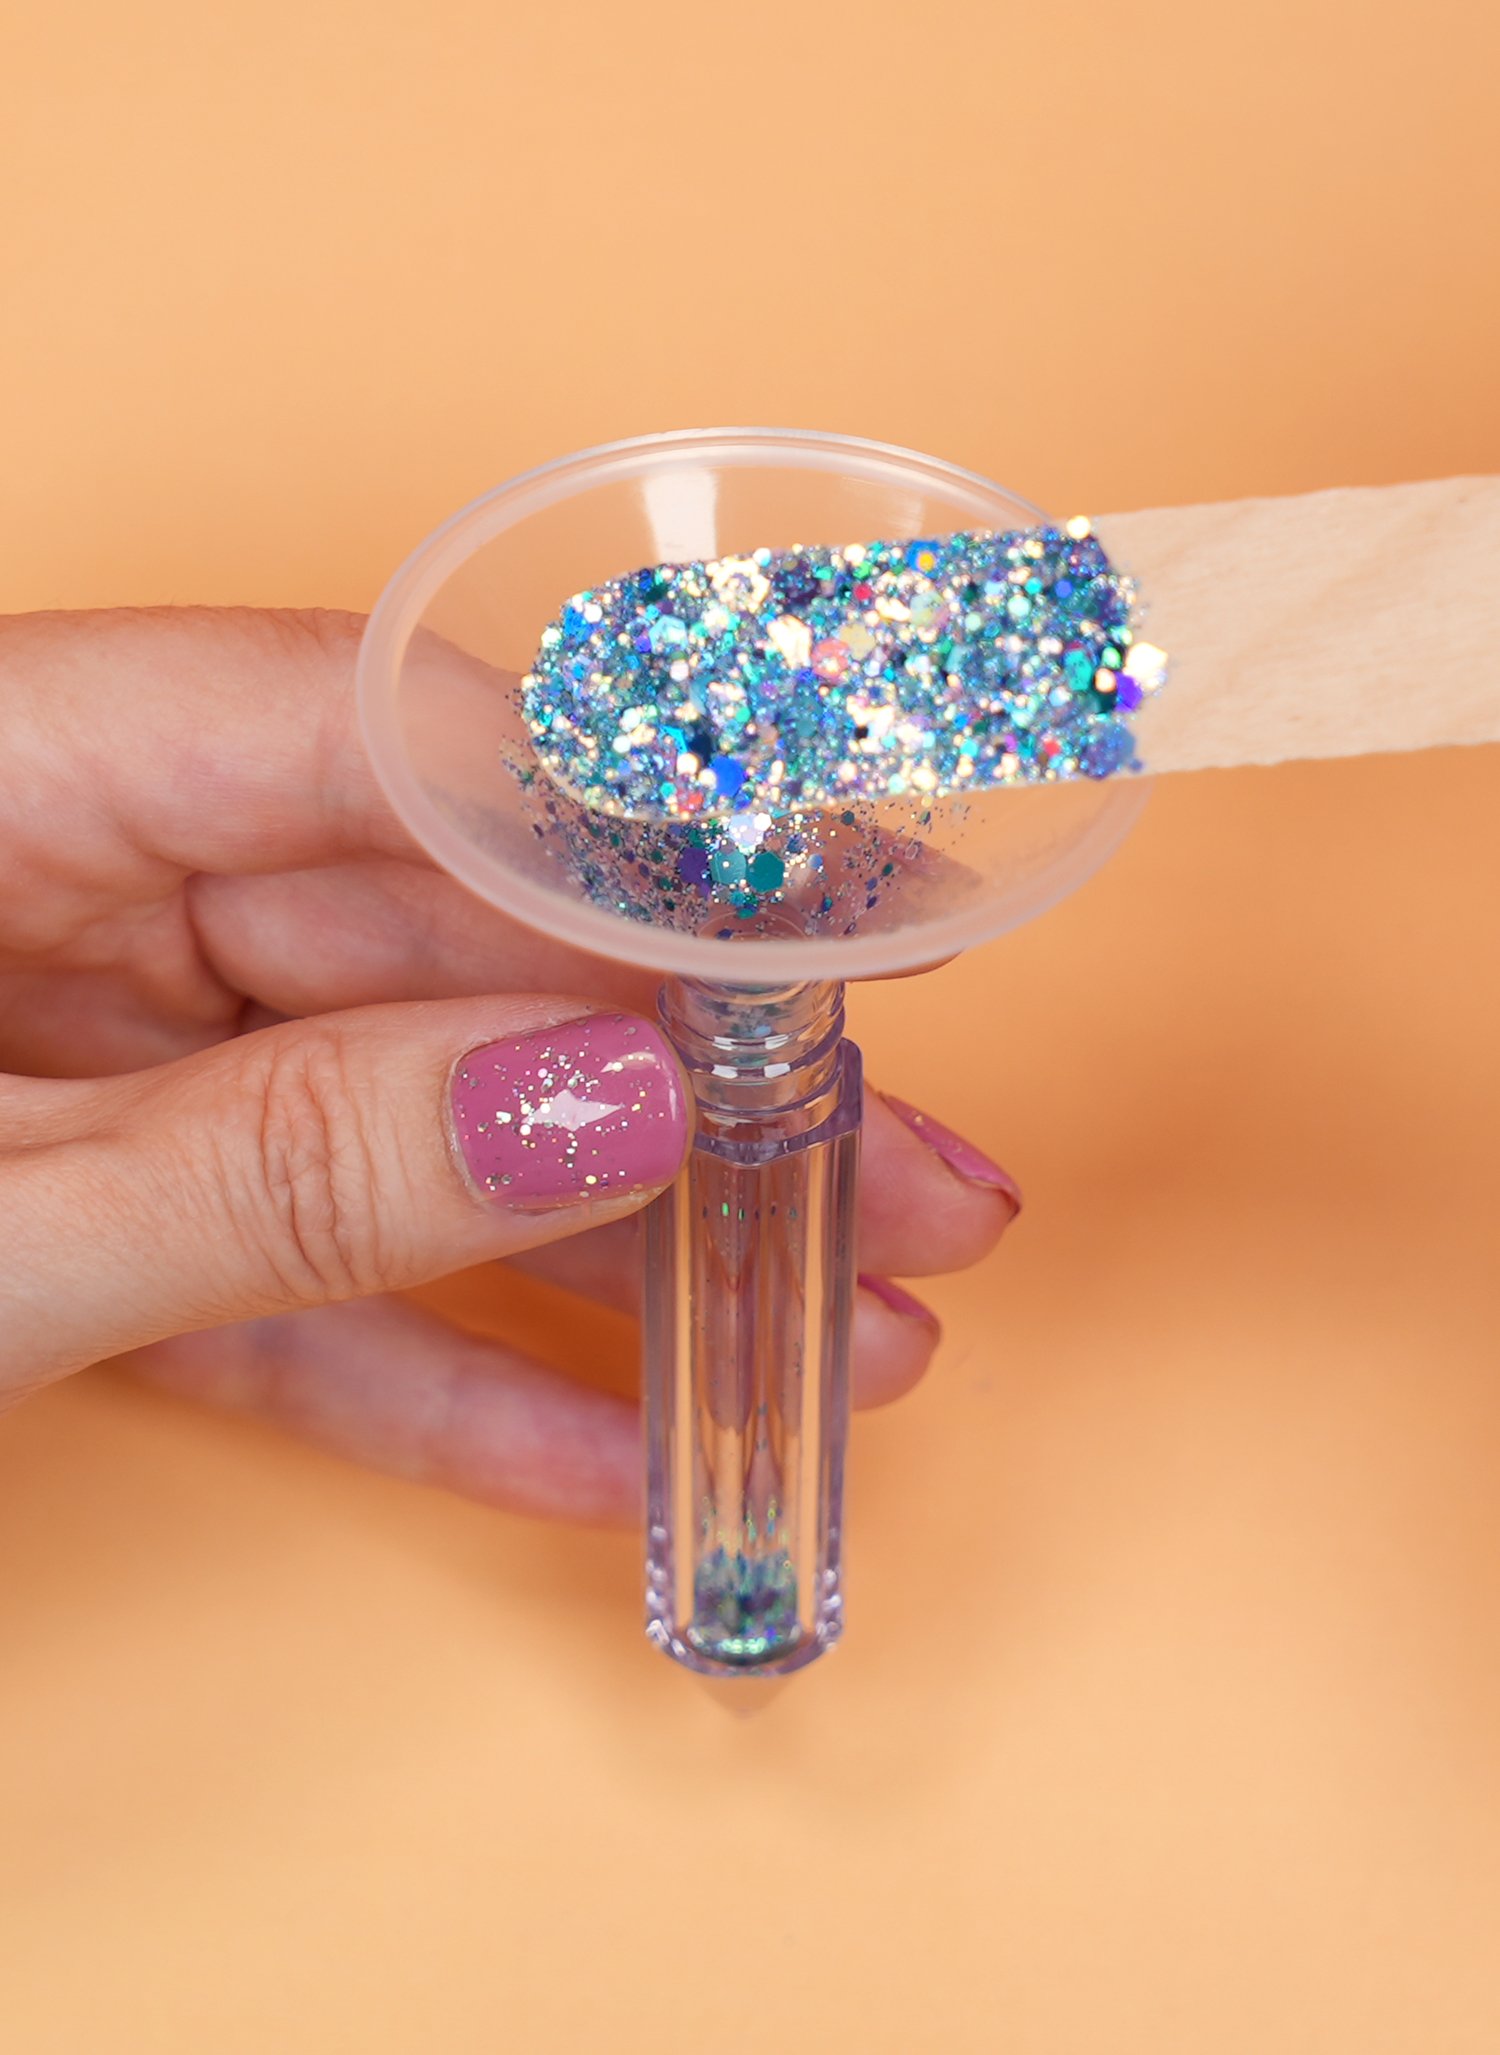 cone filter used to funnel glitter into keychain